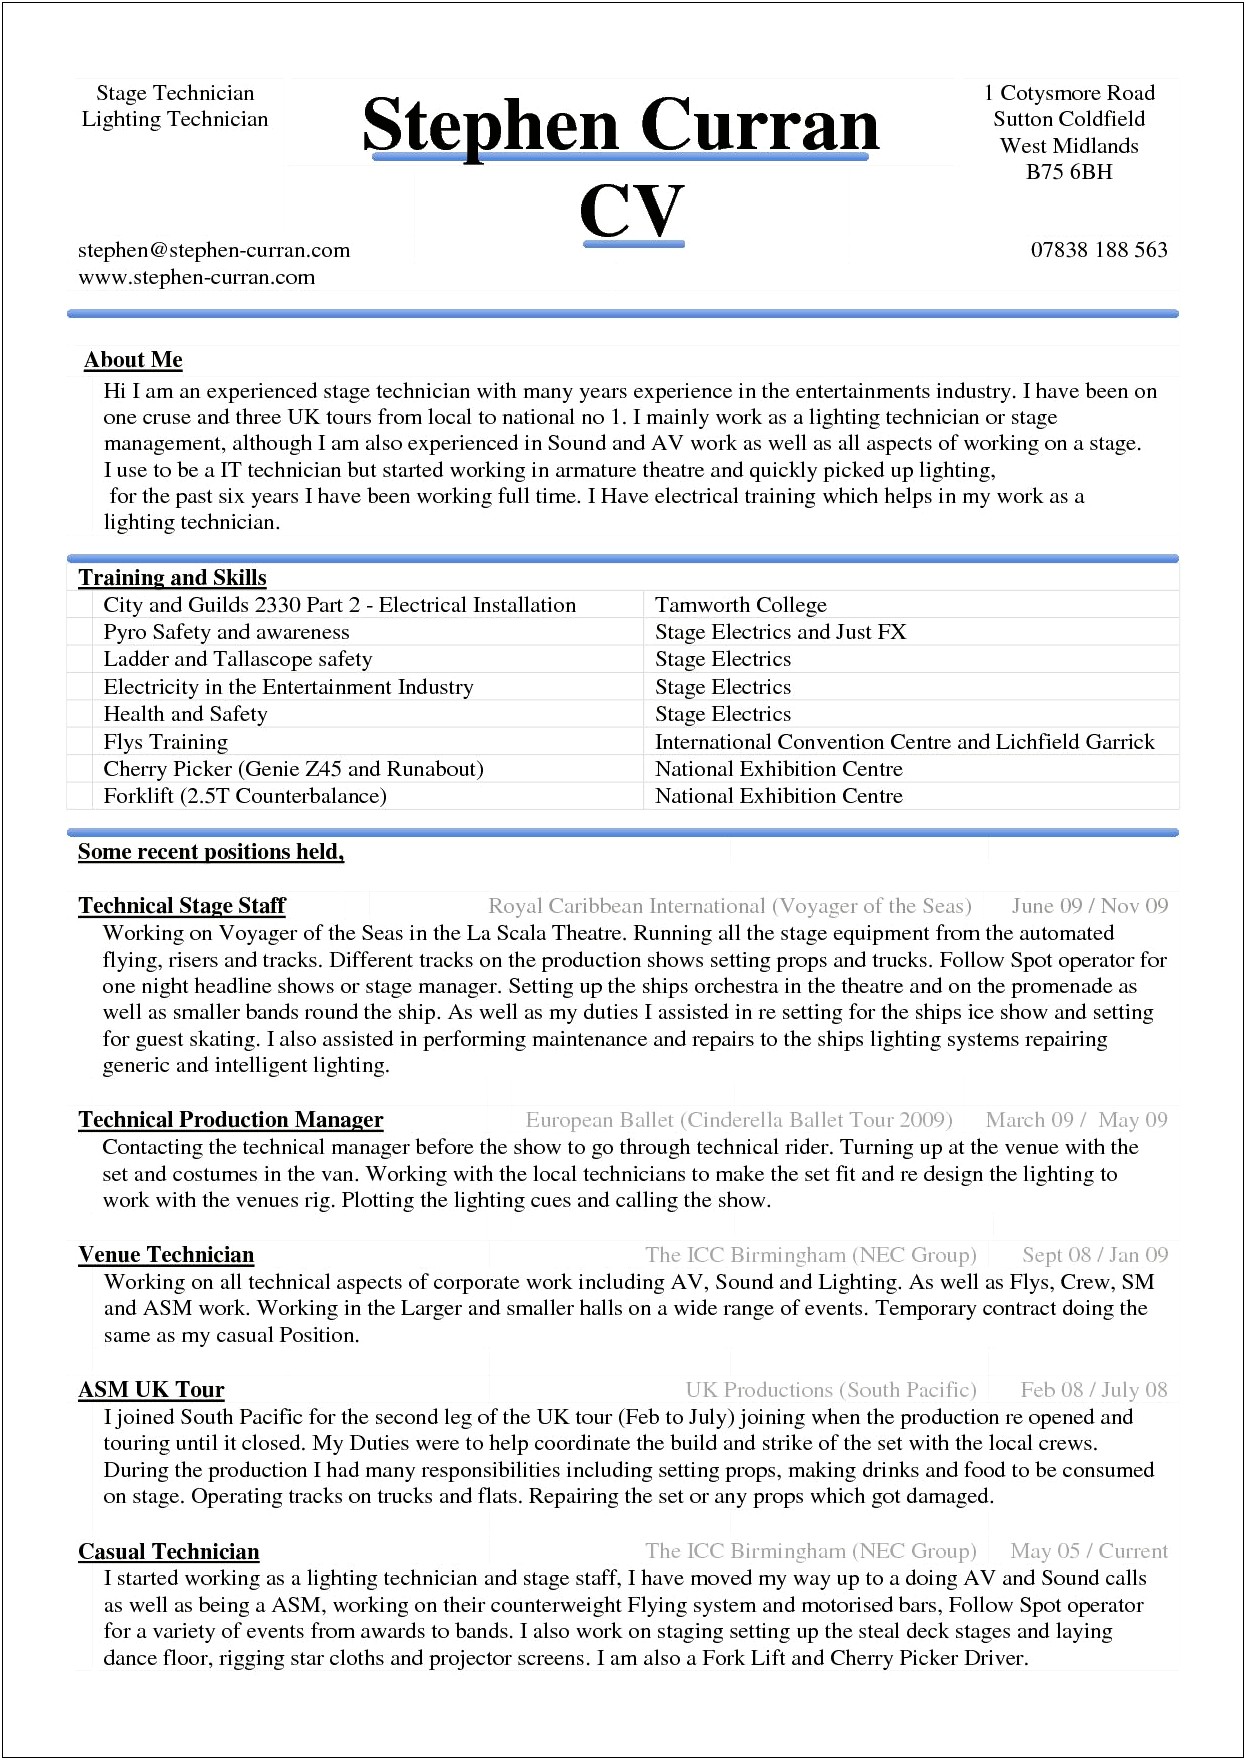 Download Free College Resume Templates